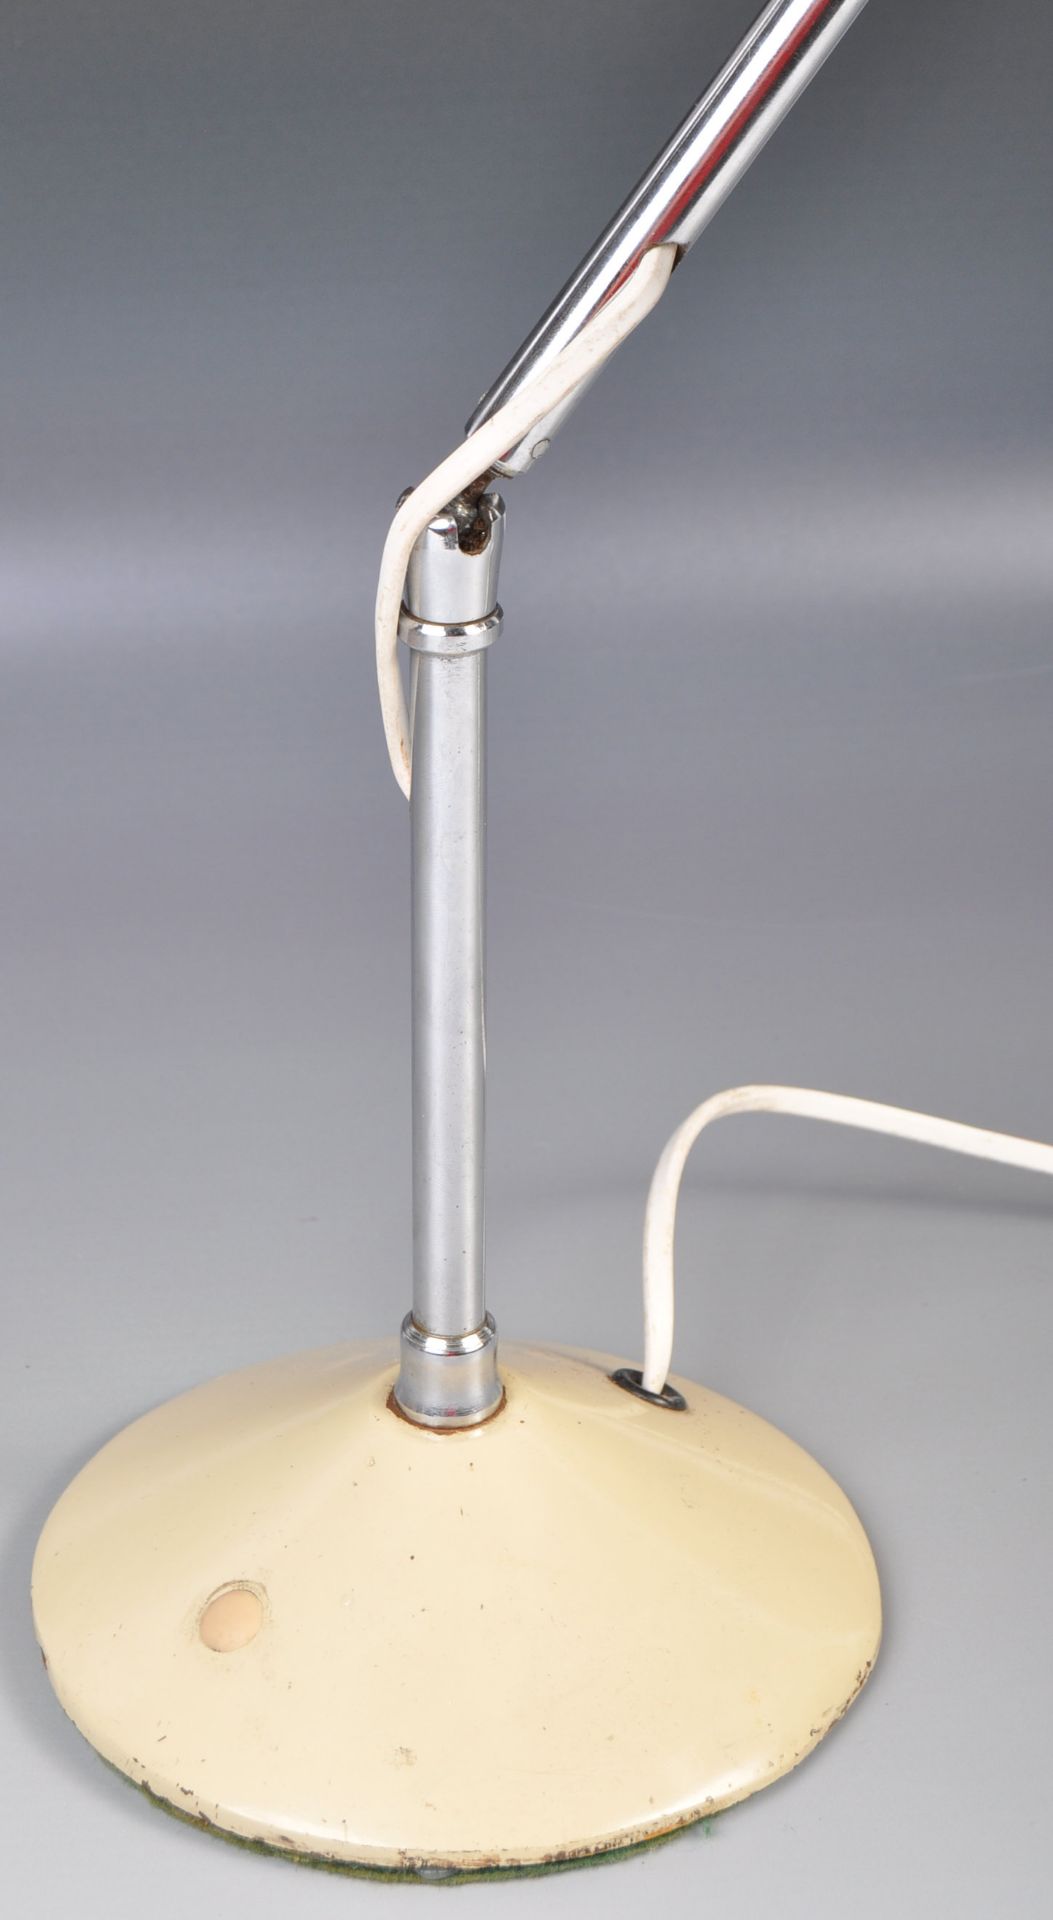 INDUSTRIAL DESK LAMP ON BALL JOINT NECK BY PIFCO - Bild 4 aus 5